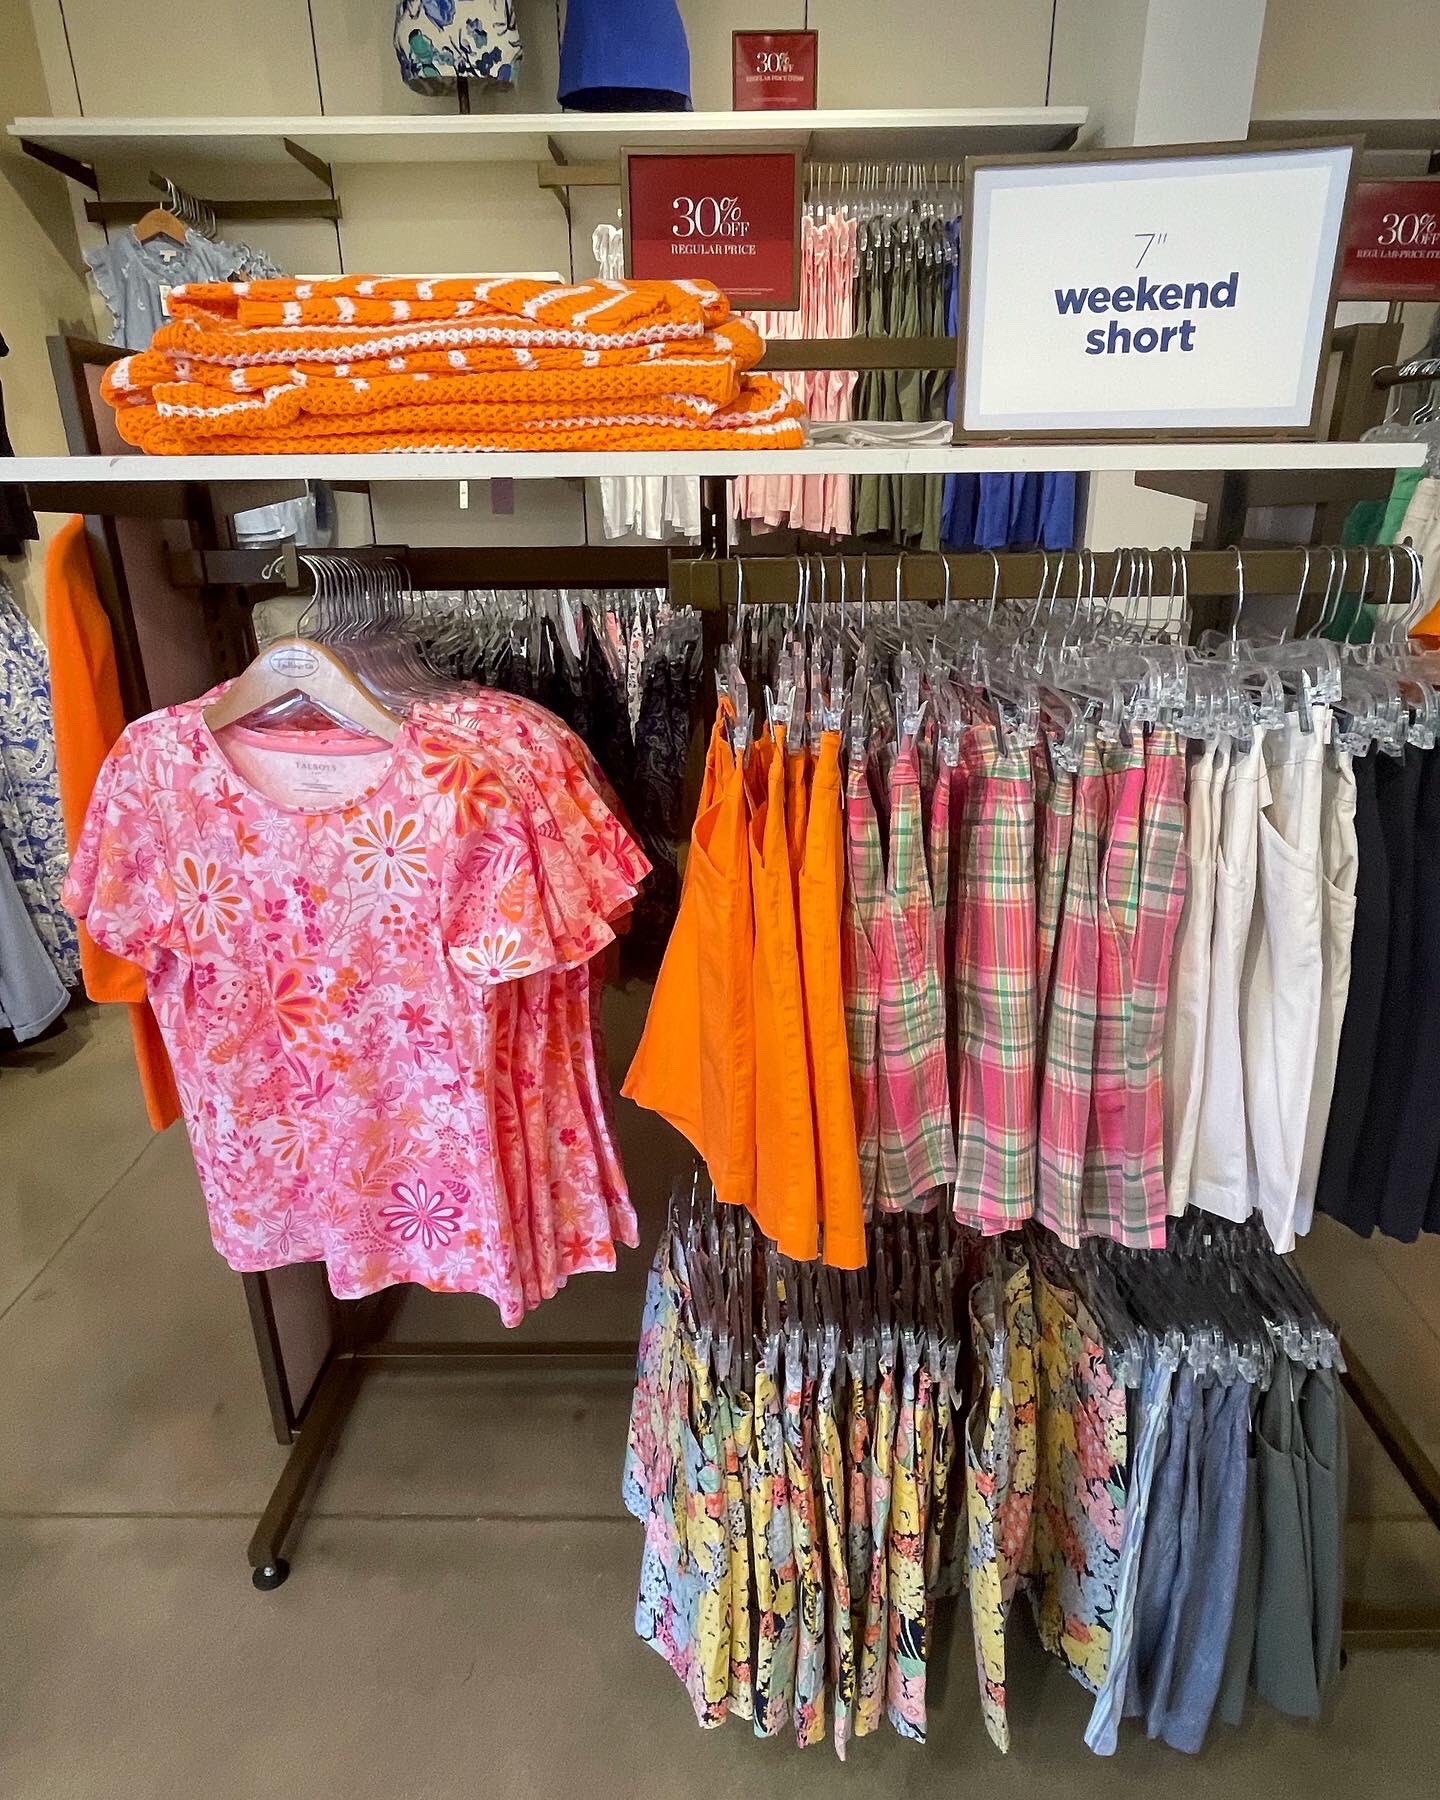 OutletAtGettysburg on X: EASY, BREEZY SUMMER STYLES AVAILABLE NOW AT TALBOTS  OUTLET! ☀️🛍 ⛵️🇺🇸🦞🌸🩴 #gettysburgoutlets #gettysburg #talbots  #talbotsoutlet #fashion #accessories #summer #summerfashion #summerstyle # outlets #outletshopping